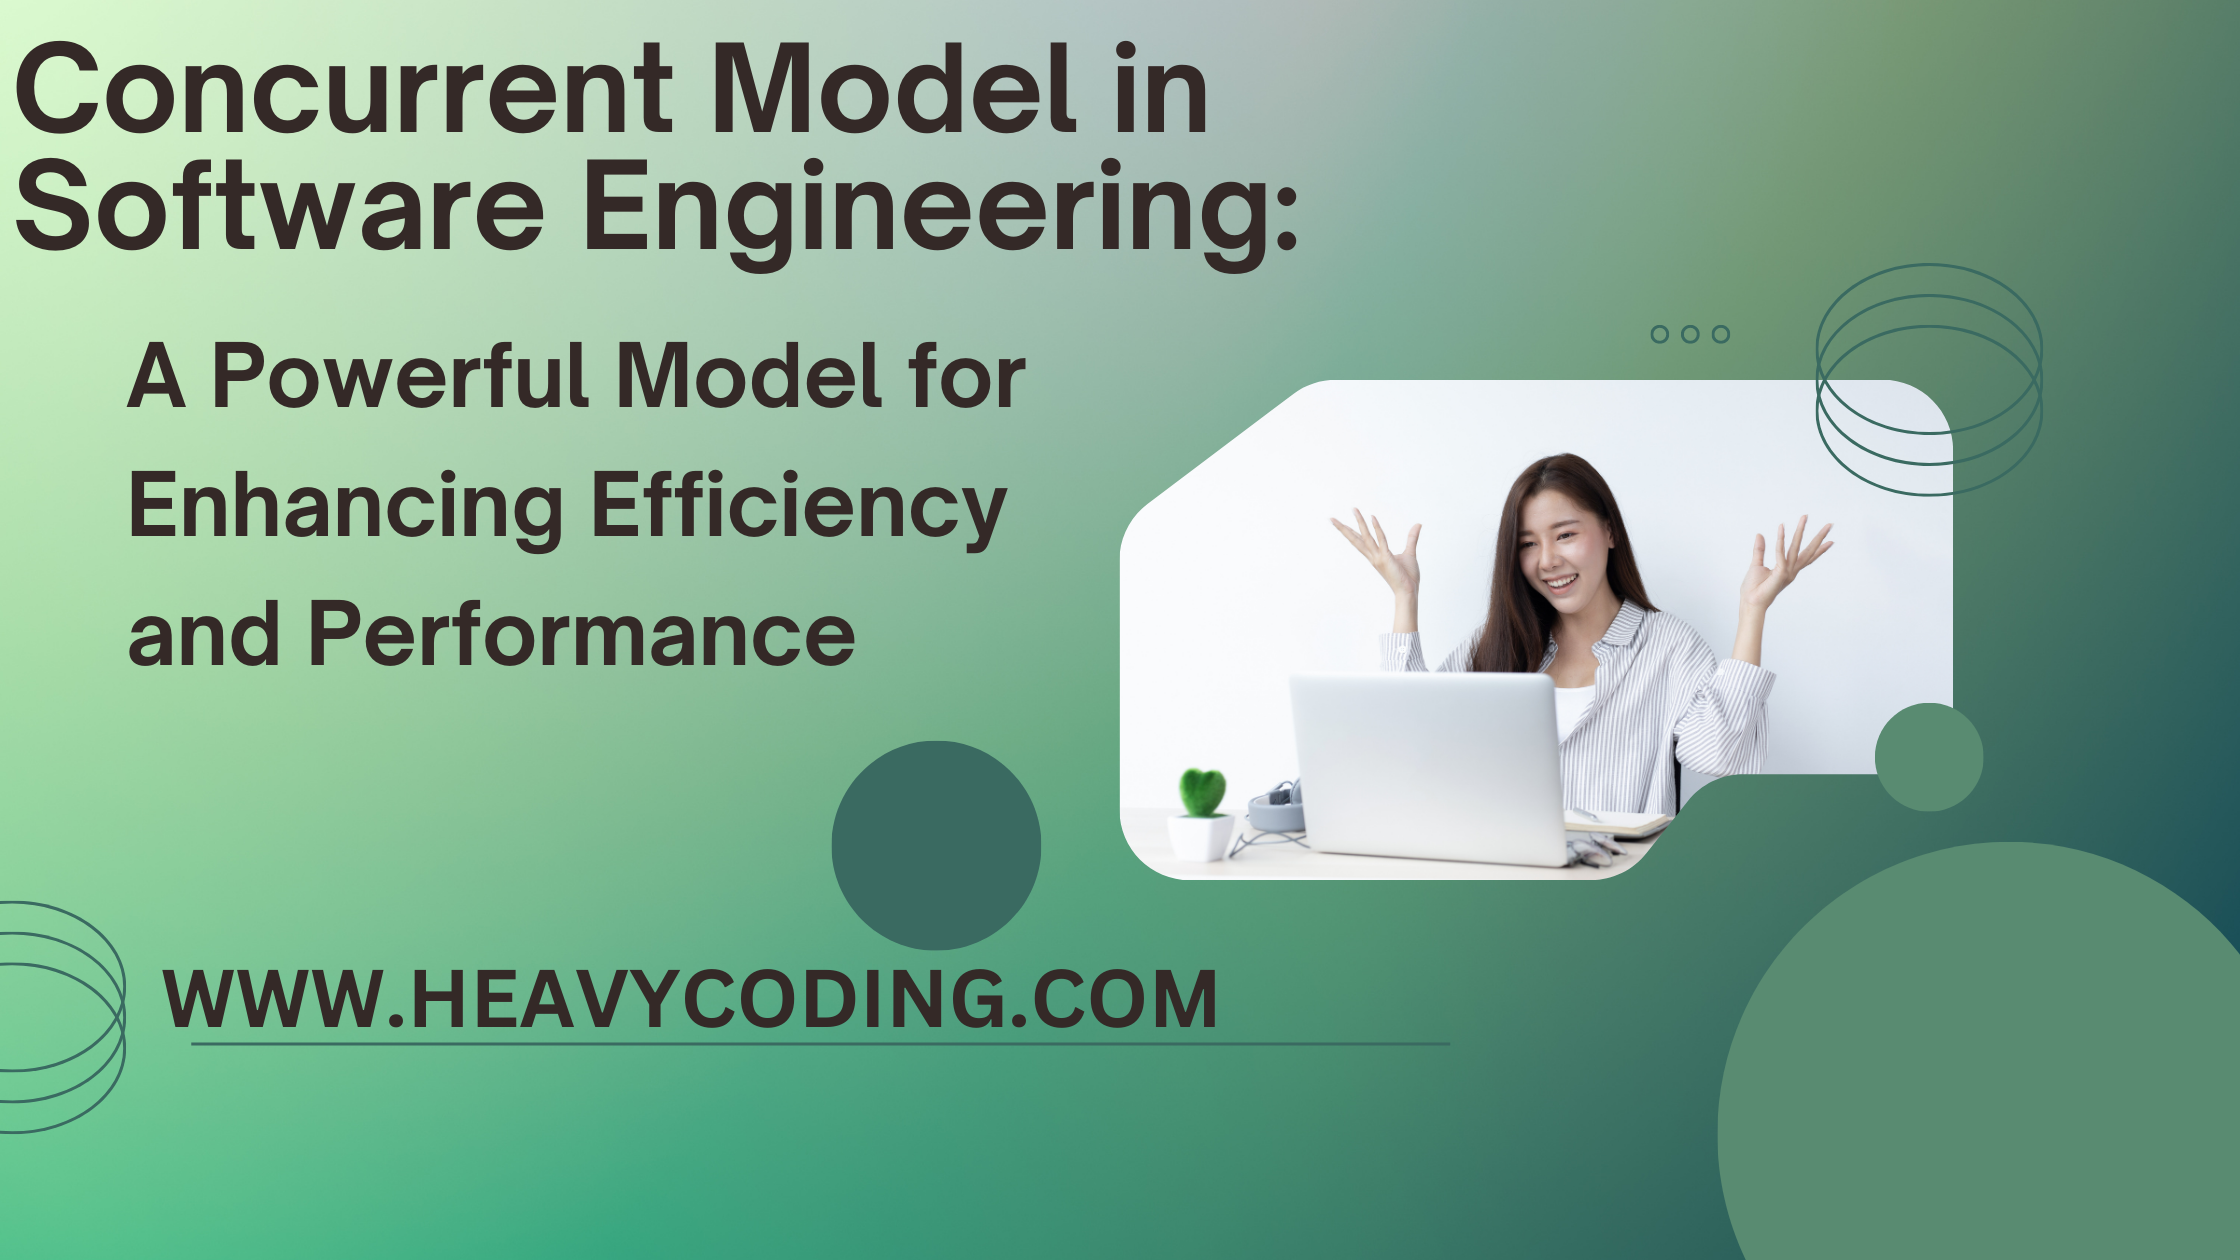 You are currently viewing Concurrent Model in Software Engineering: A Powerful Model for Enhancing Efficiency and Performance